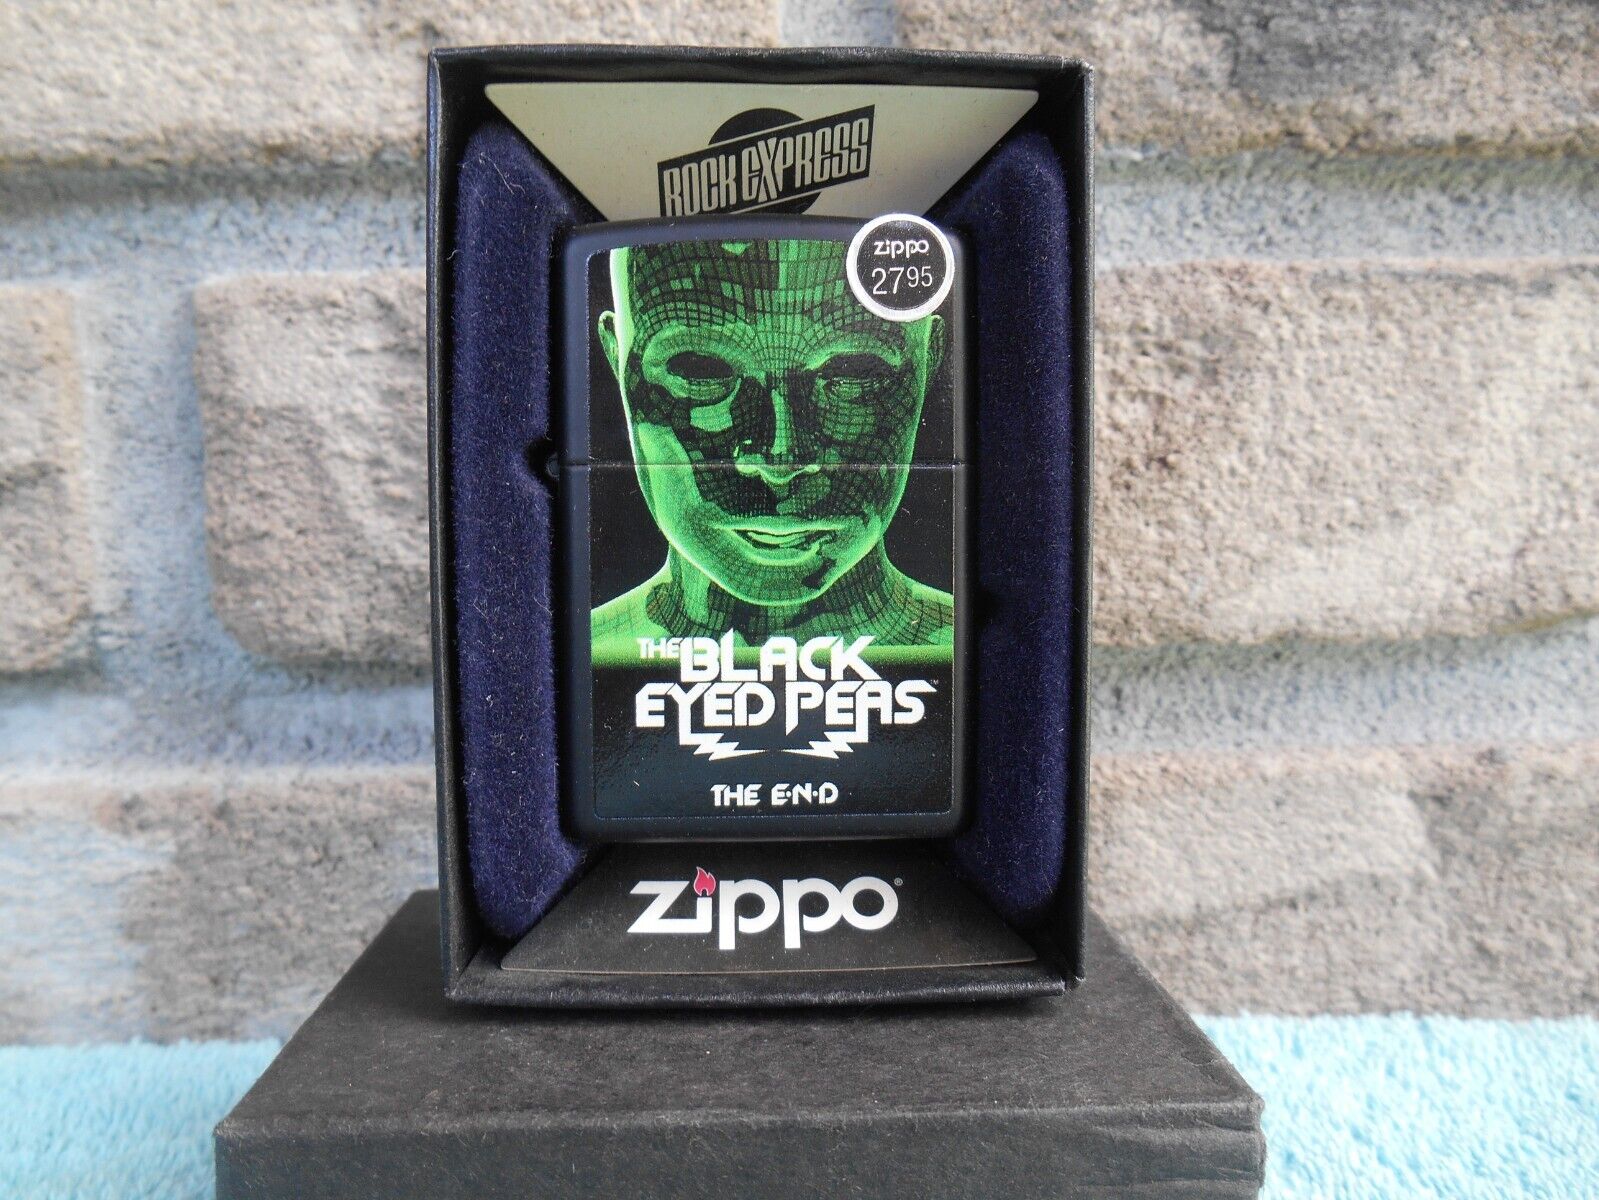 ZIPPO LIGHTER 2011 C-11 ROCK EXPRESS THE BLACK EYED PEAS - THE END. NEW IN BOX